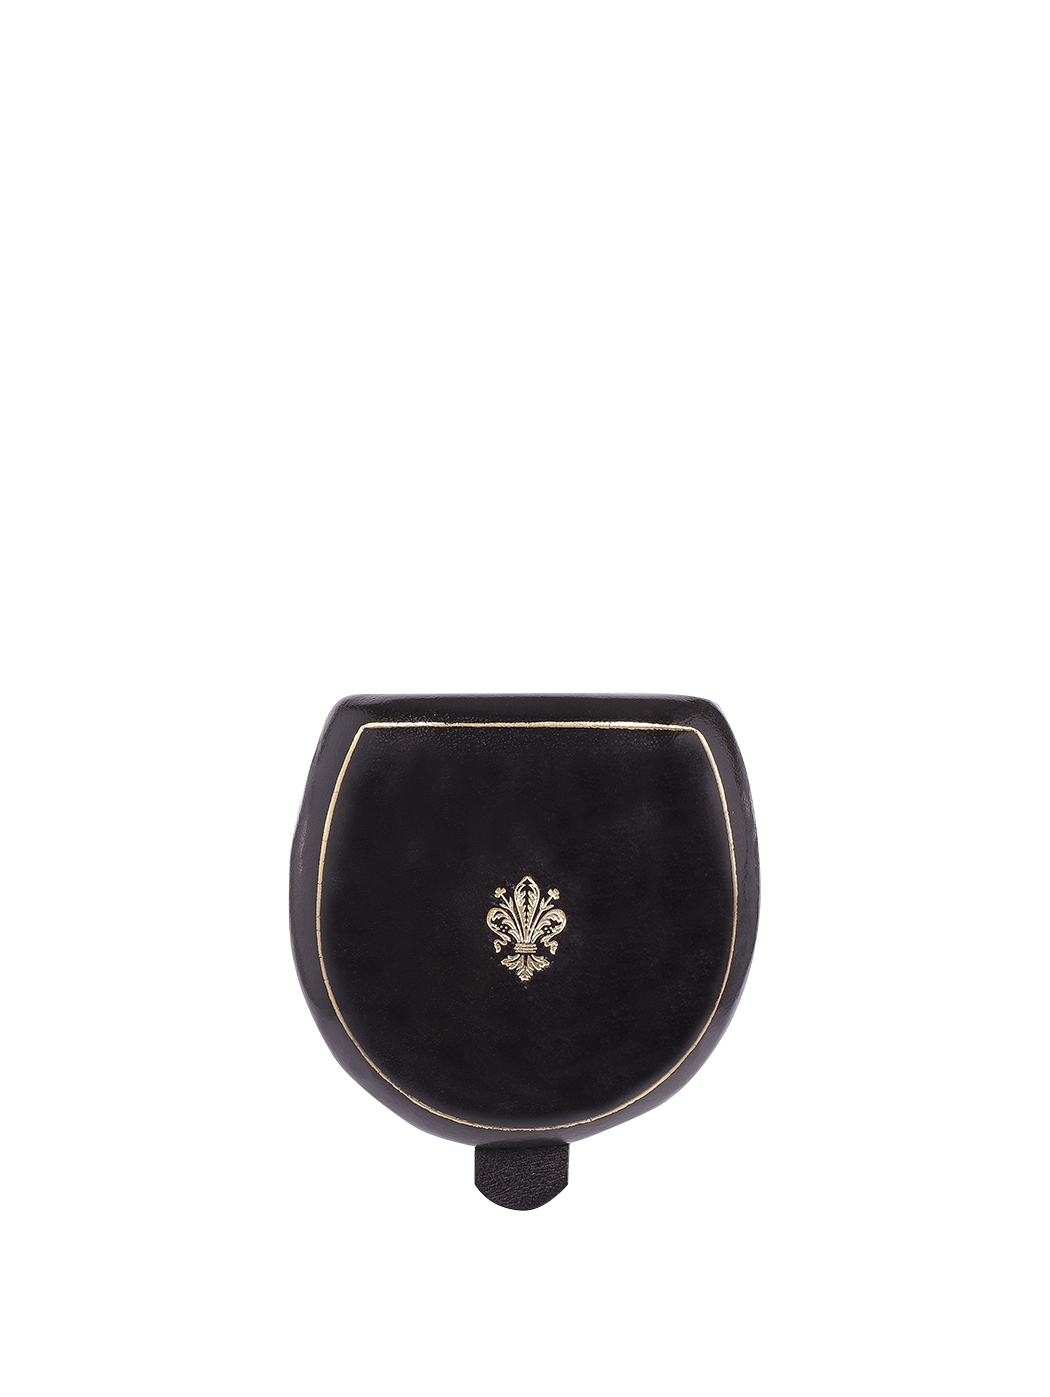 Florentine Lily Tacco Coin Holder Black